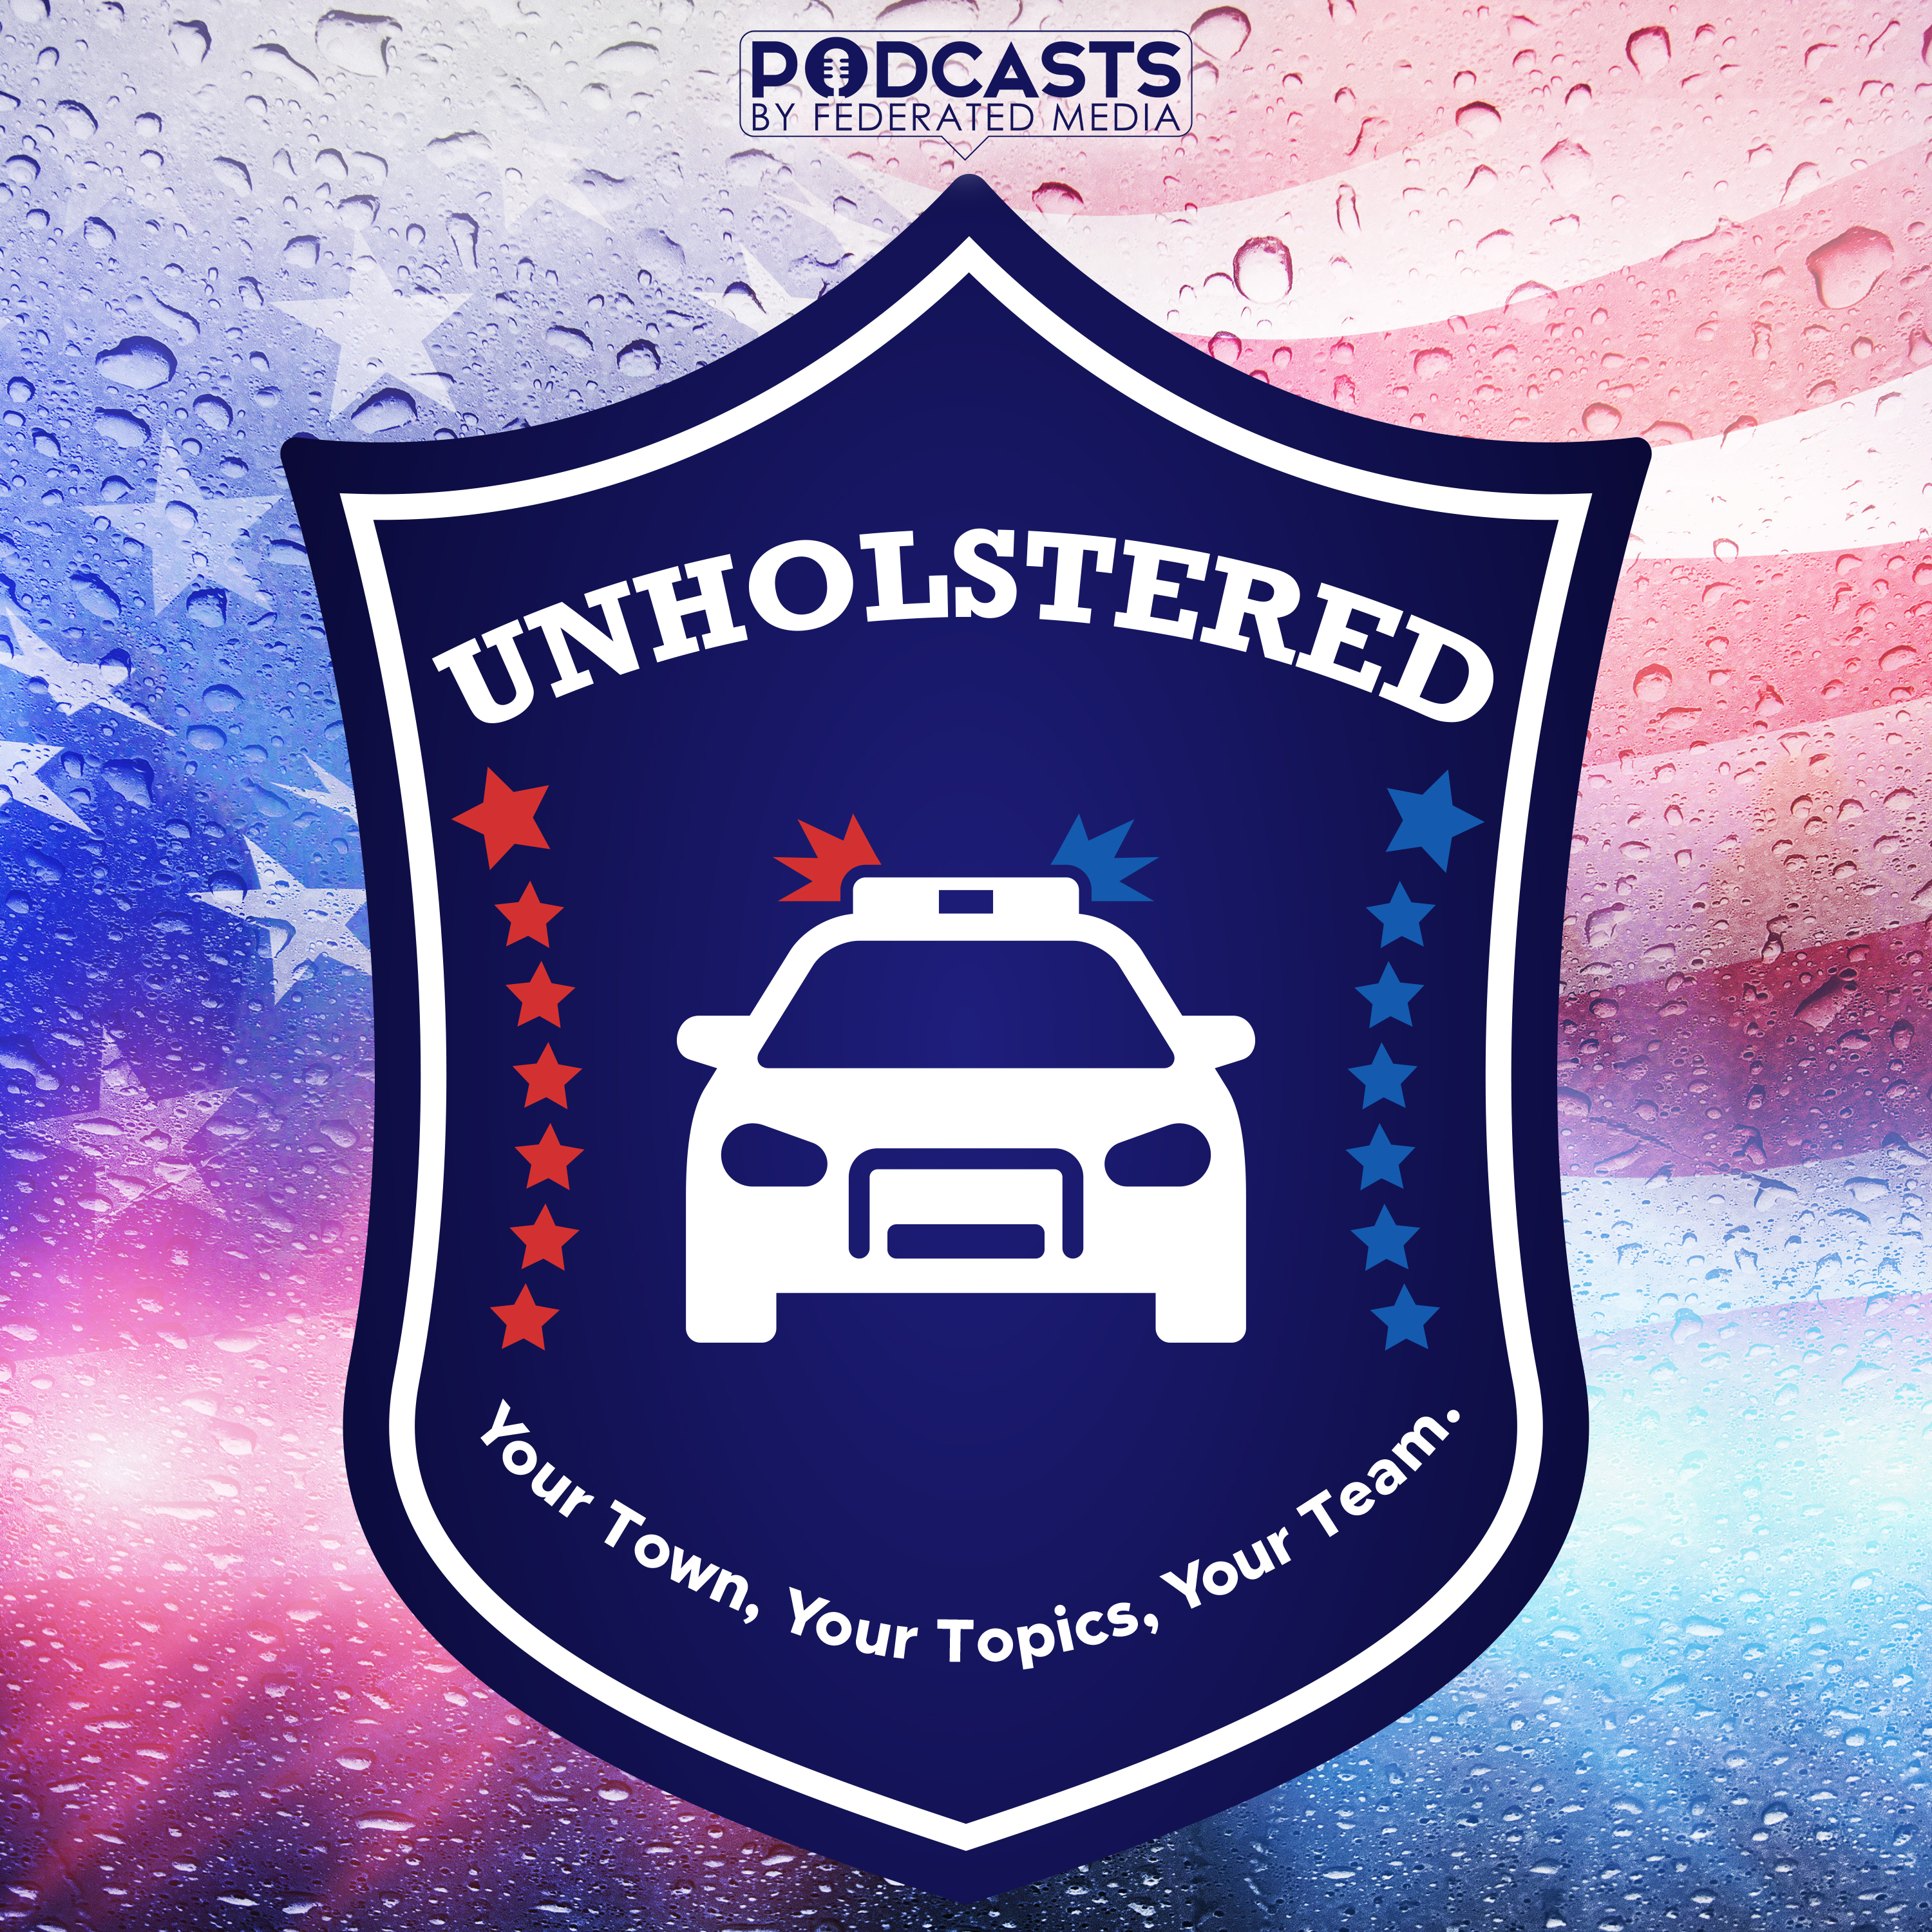 Ep 92: Entire police force quits, now what?